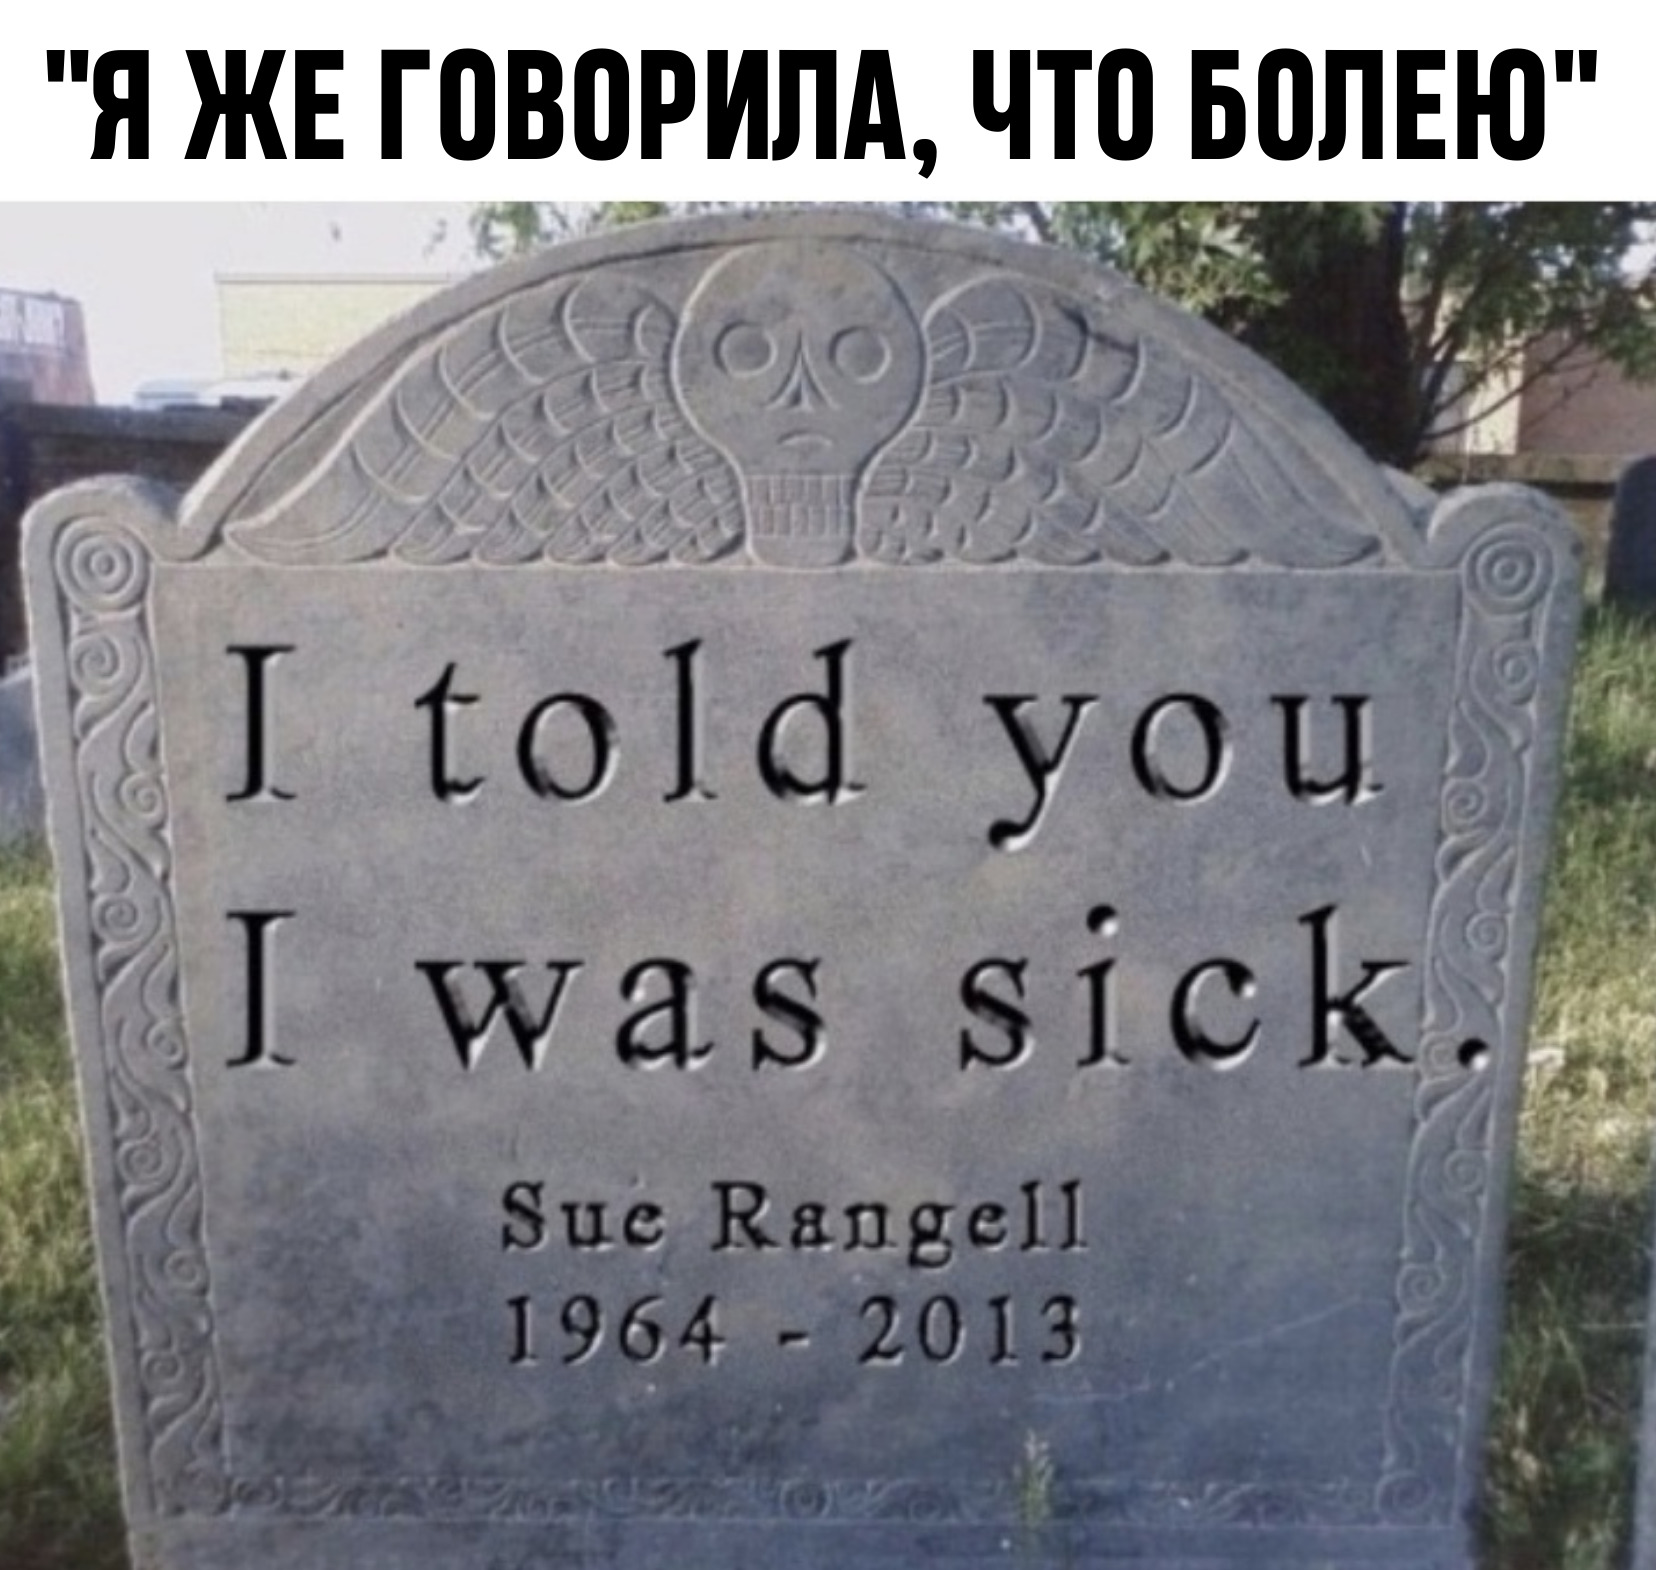 I told me the message. Надгробие я же говорил что болен. I told you i was sick надгробие. Here Lies на надгробии. Я говорил что я .болен надгробие.